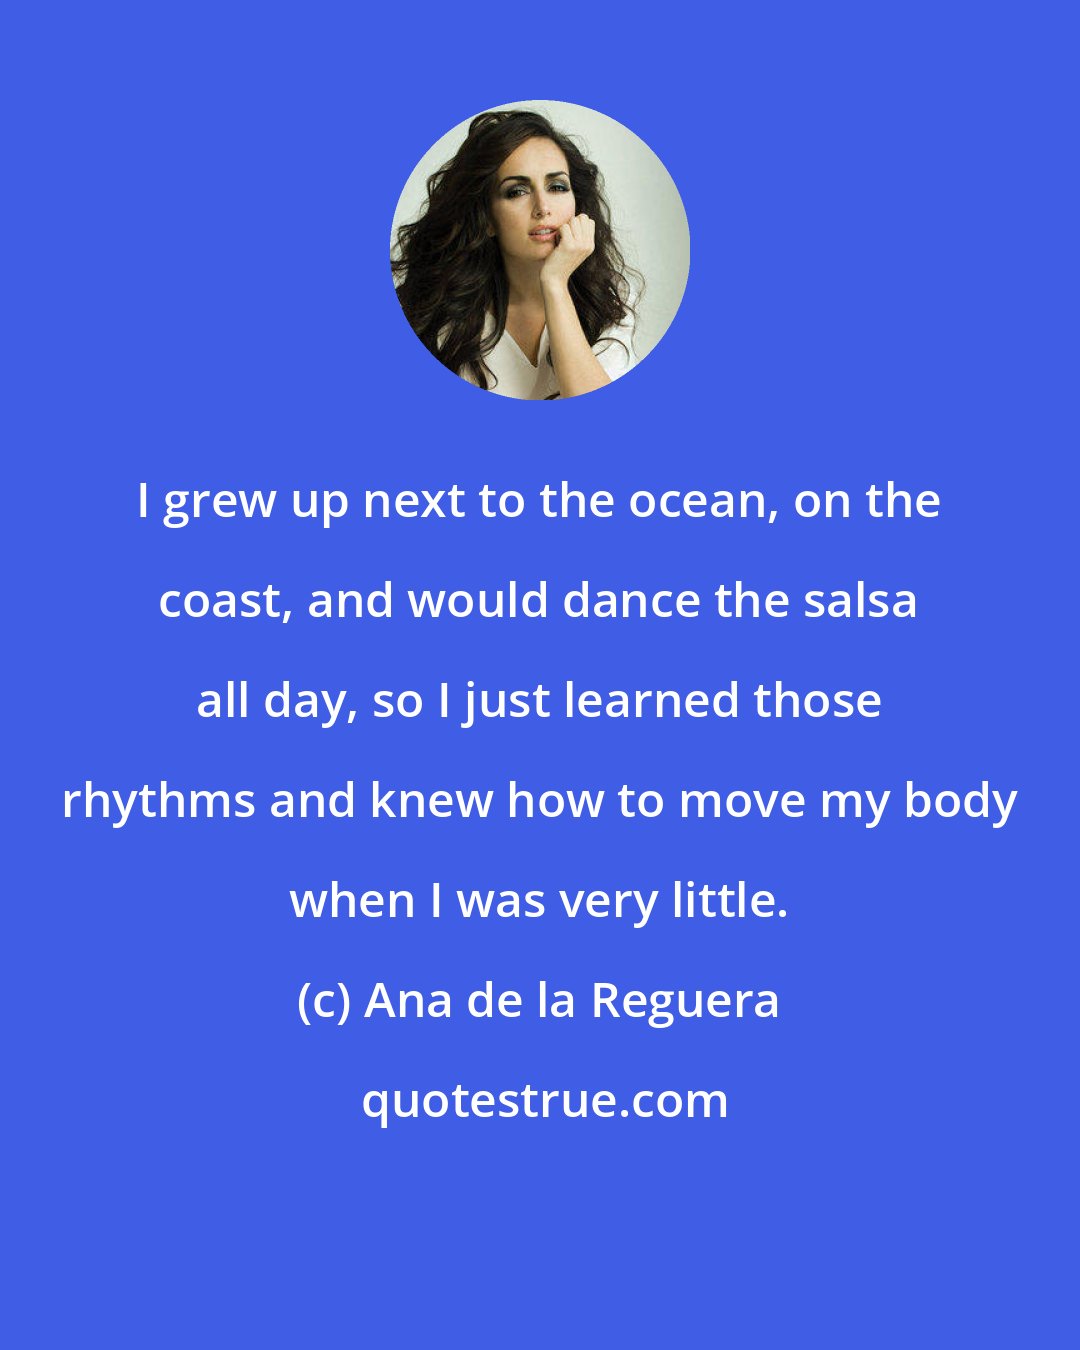 Ana de la Reguera: I grew up next to the ocean, on the coast, and would dance the salsa all day, so I just learned those rhythms and knew how to move my body when I was very little.